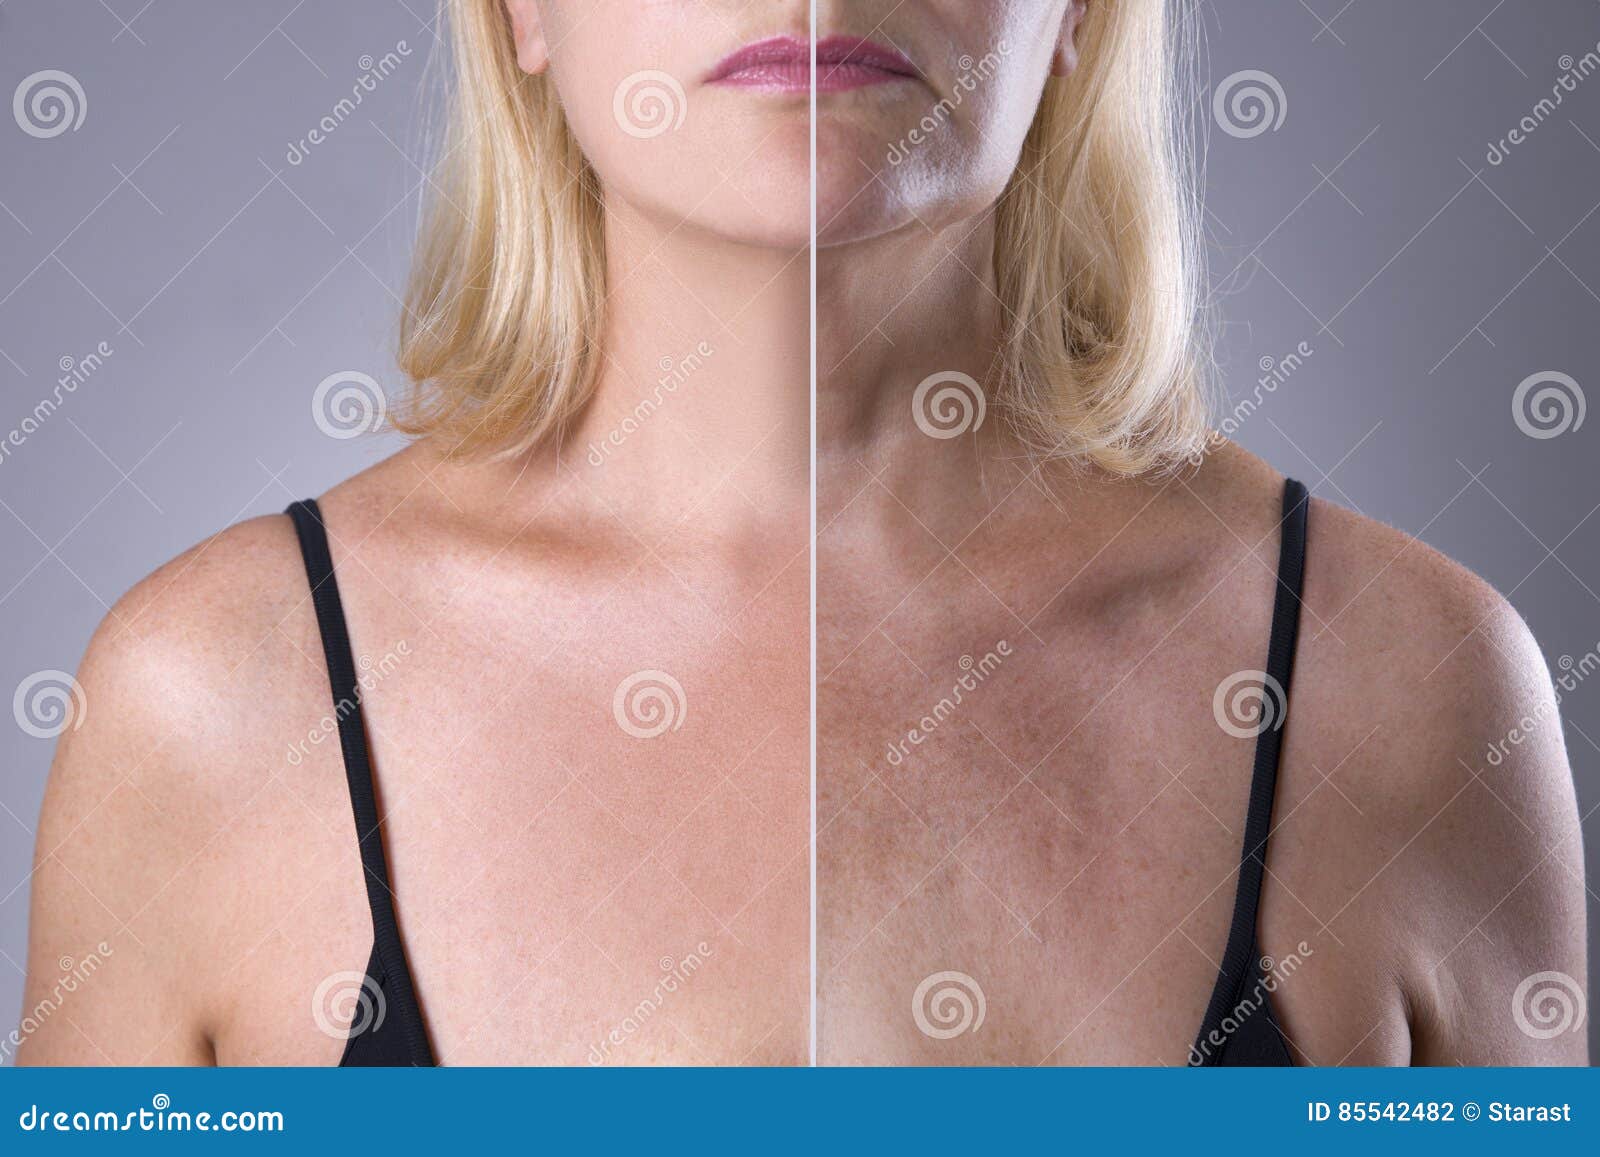 rejuvenation woman`s skin, before after anti aging concept, wrinkle treatment, facelift and plastic surgery